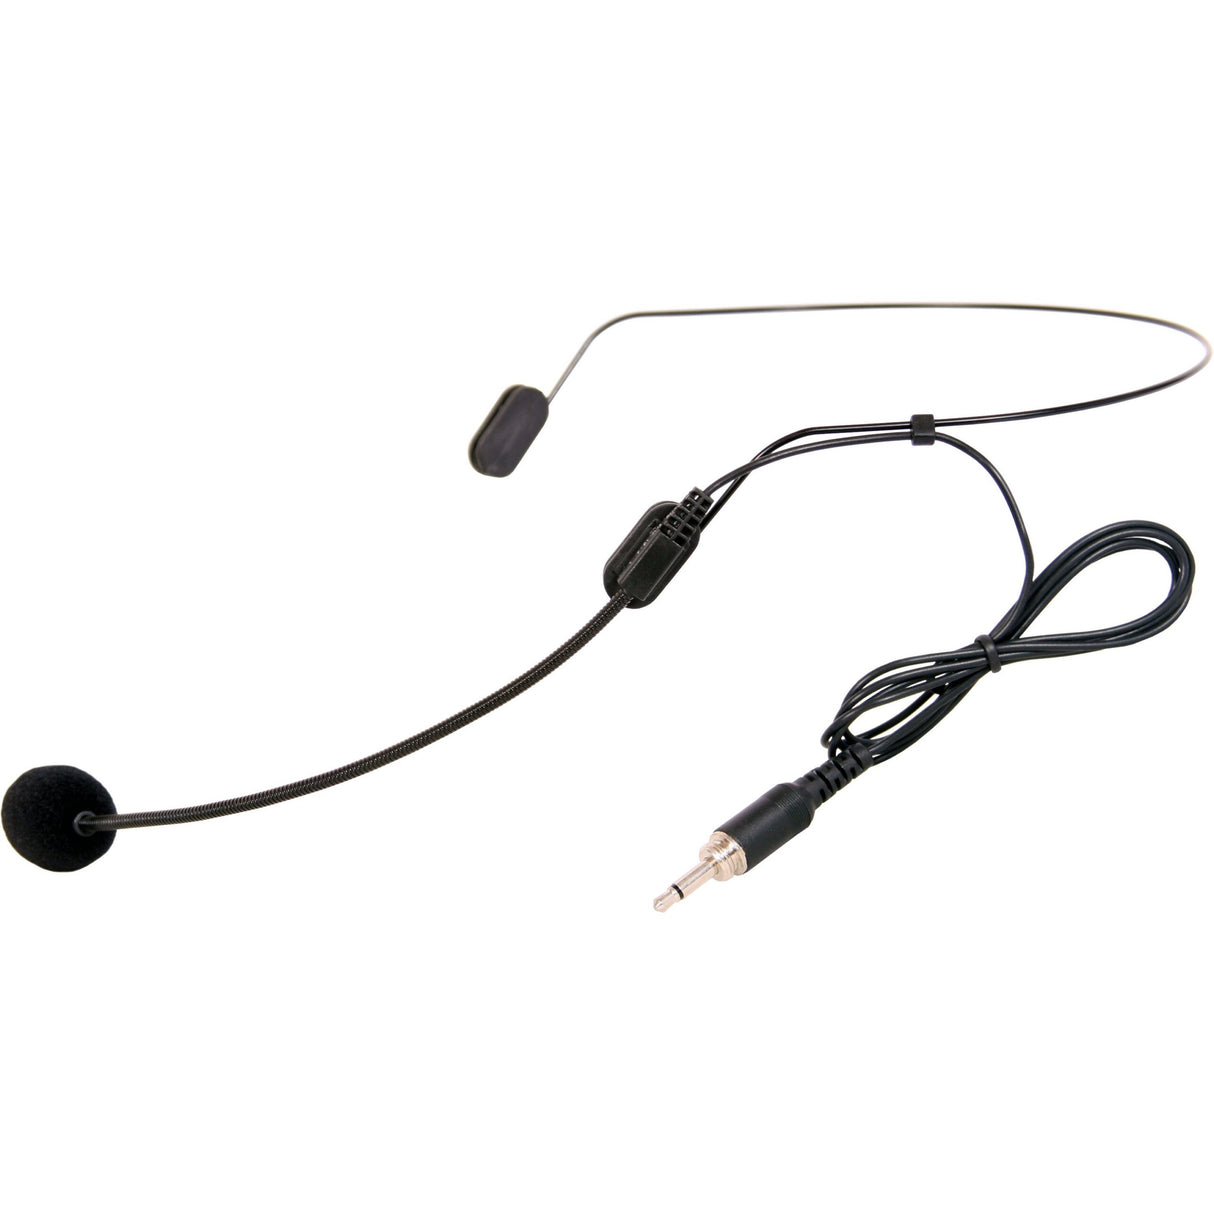 Galaxy Audio HS13-UBK Uni-Directional Wrap-Around Headset for EDX and TQ8 Series